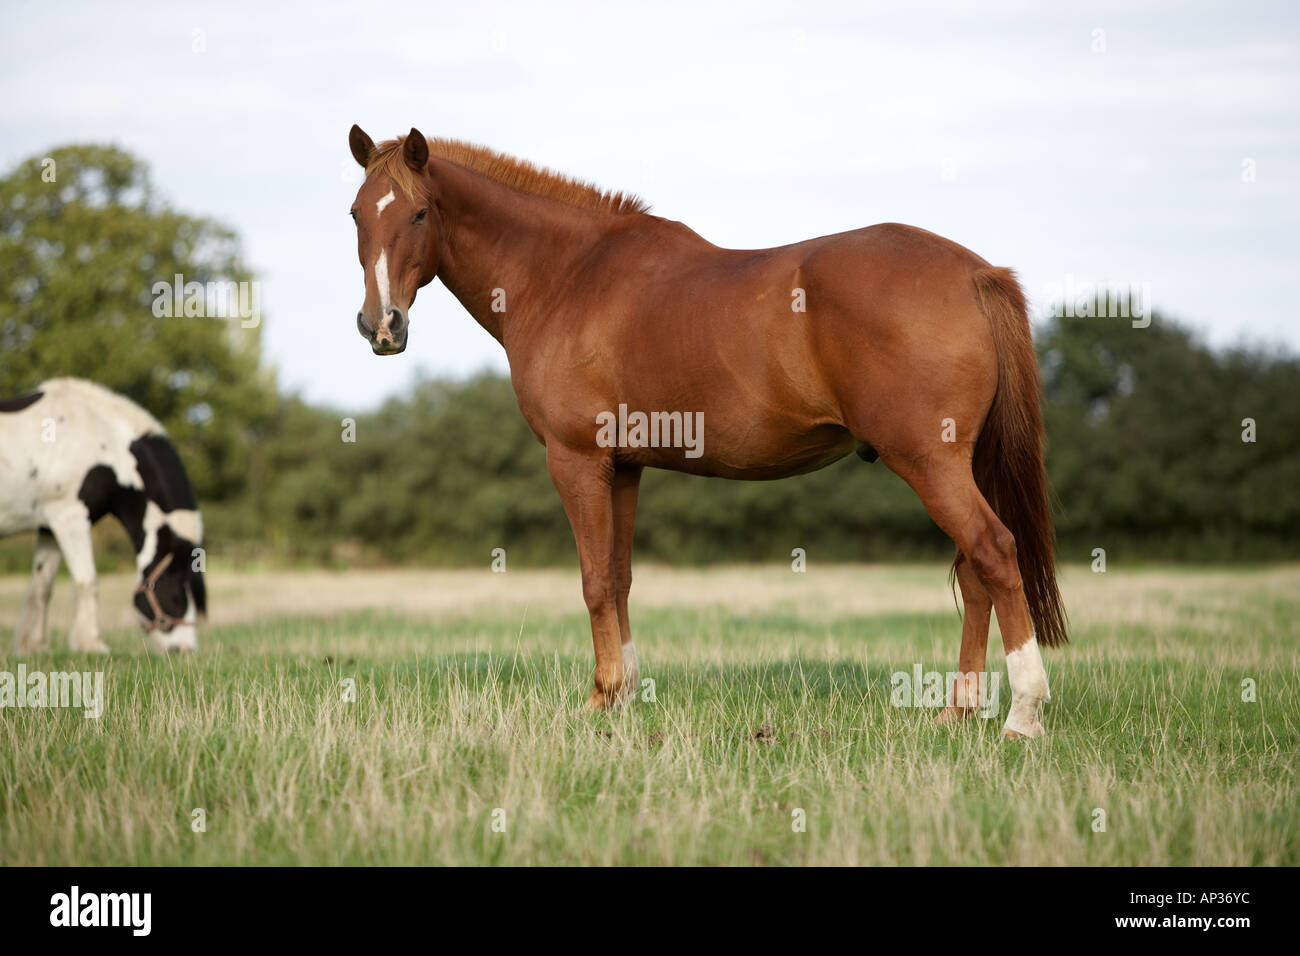 Chestnut horse in a paddock Stock Photo